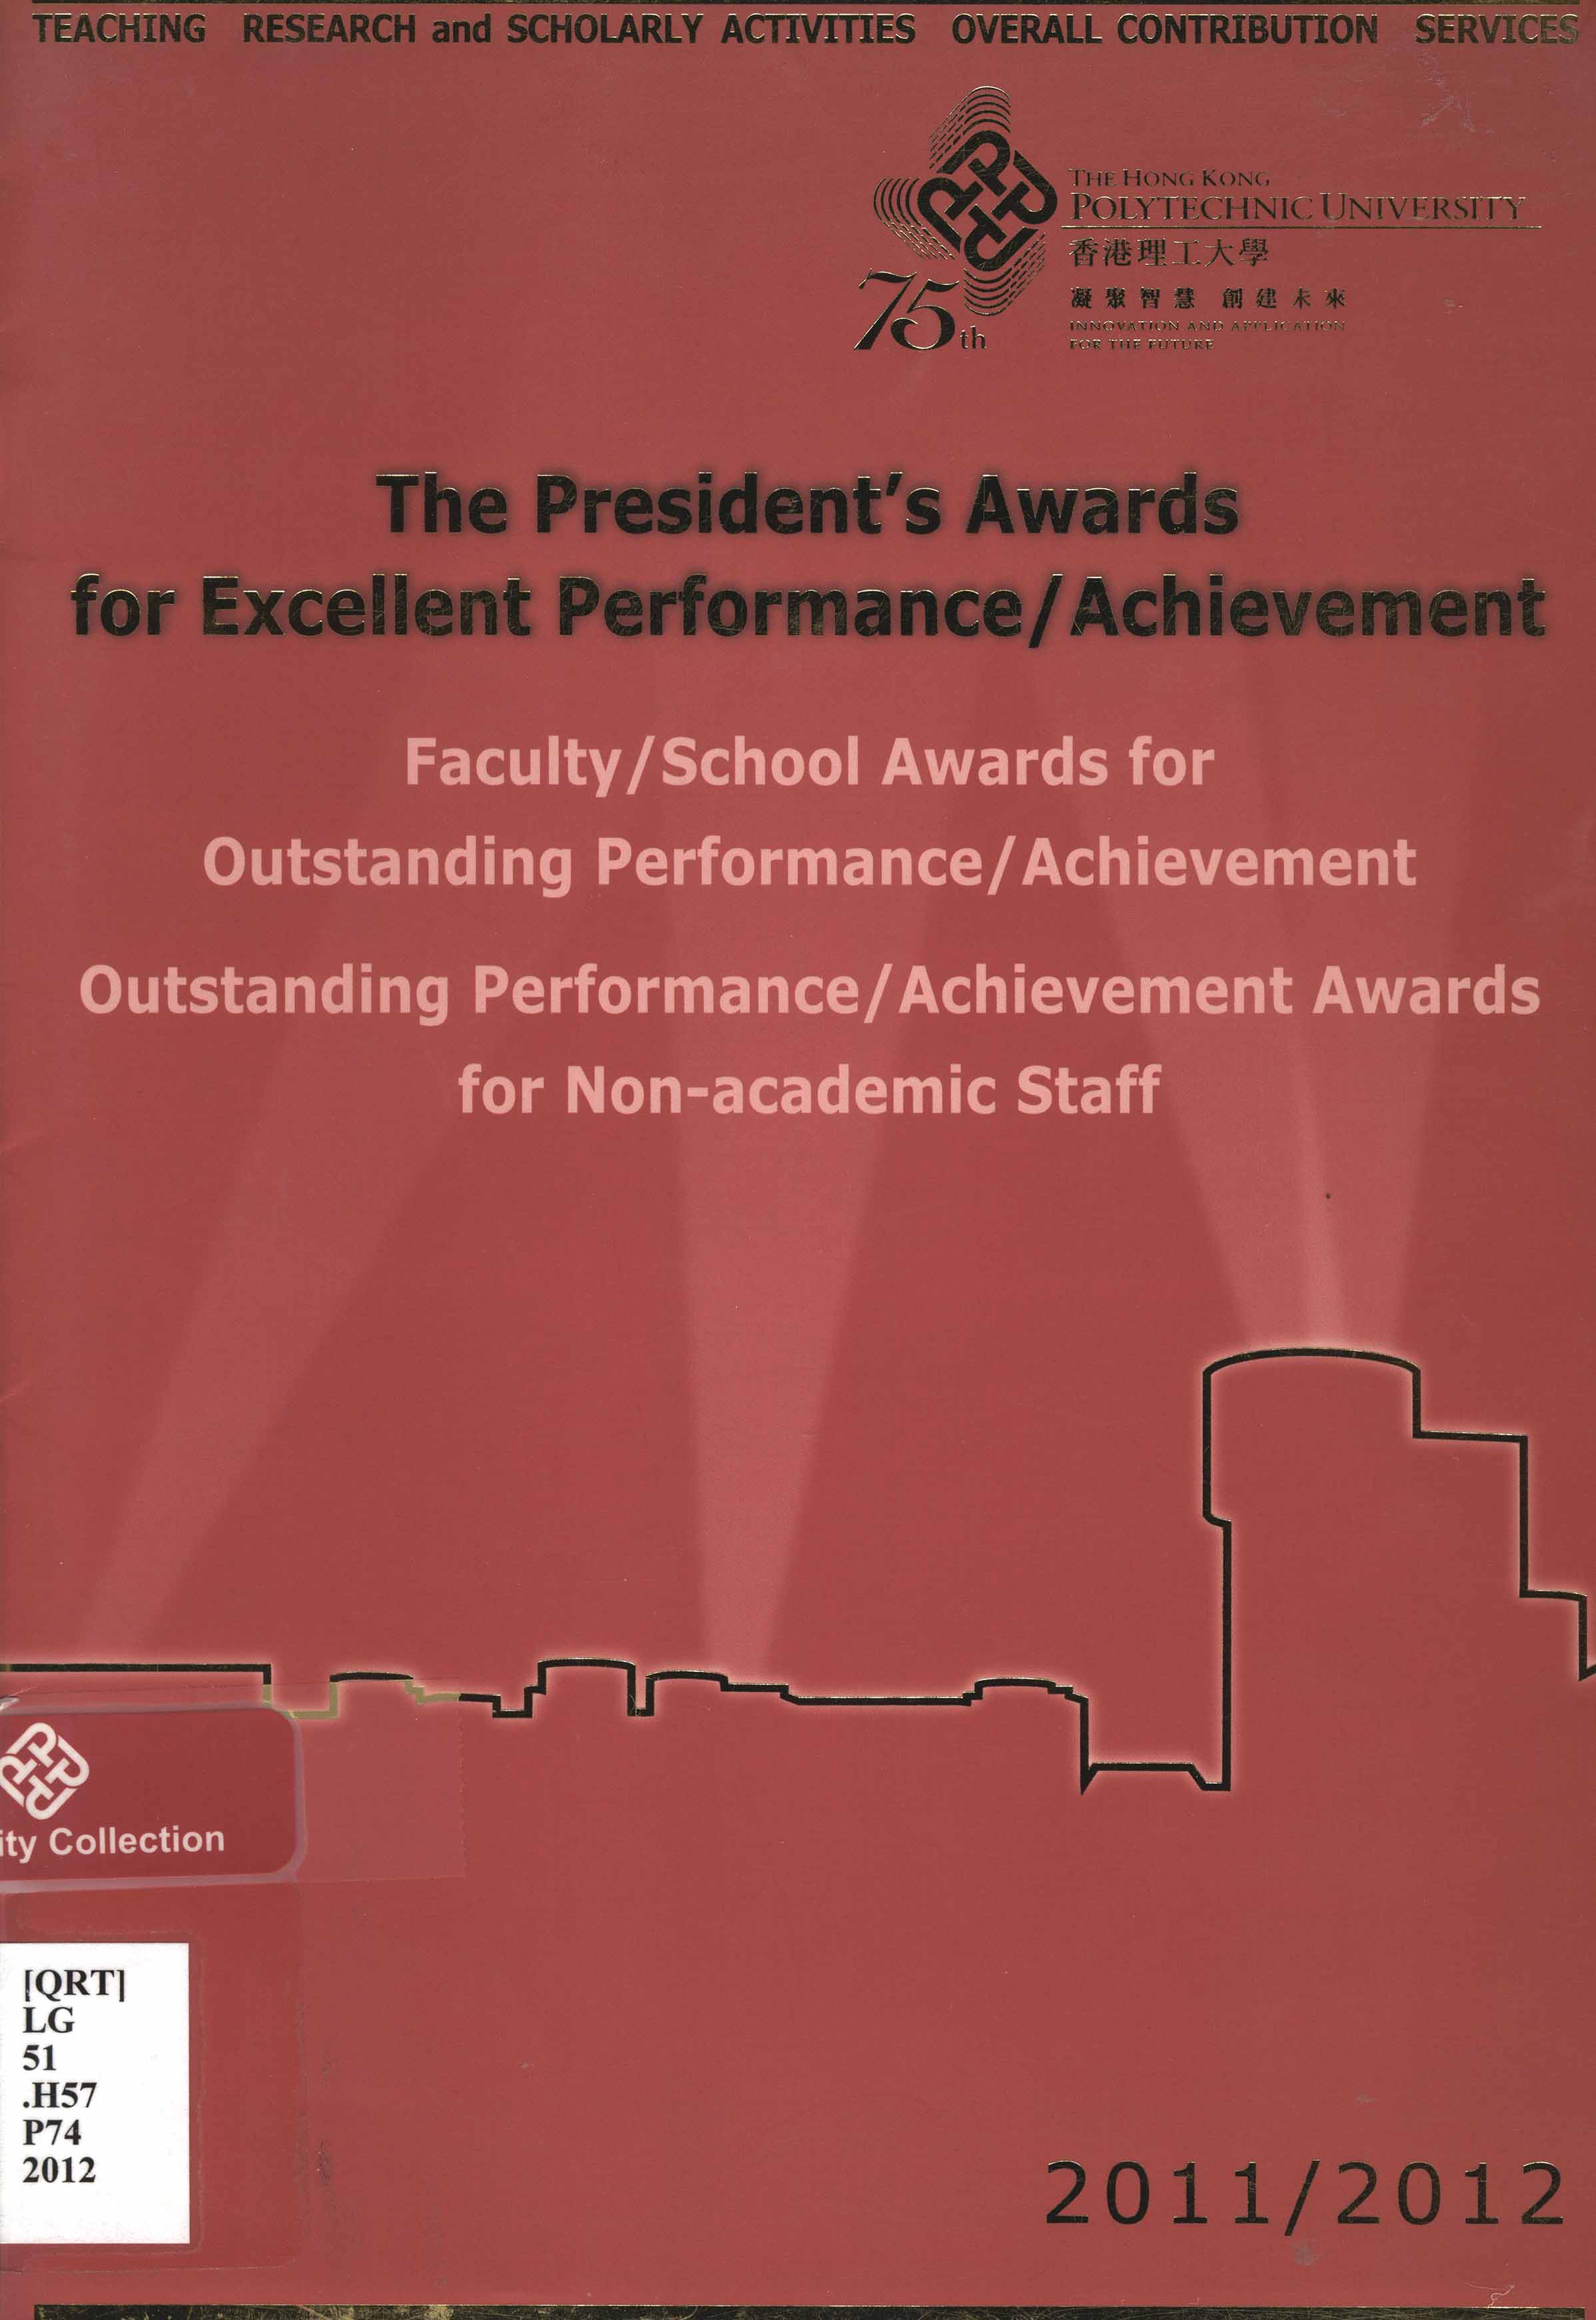 The President's awards for excellent performance / achievement : faculty / school awards for outstanding performance / achievement, outstanding performance / achievement awards for non-academic staff 2011/2012